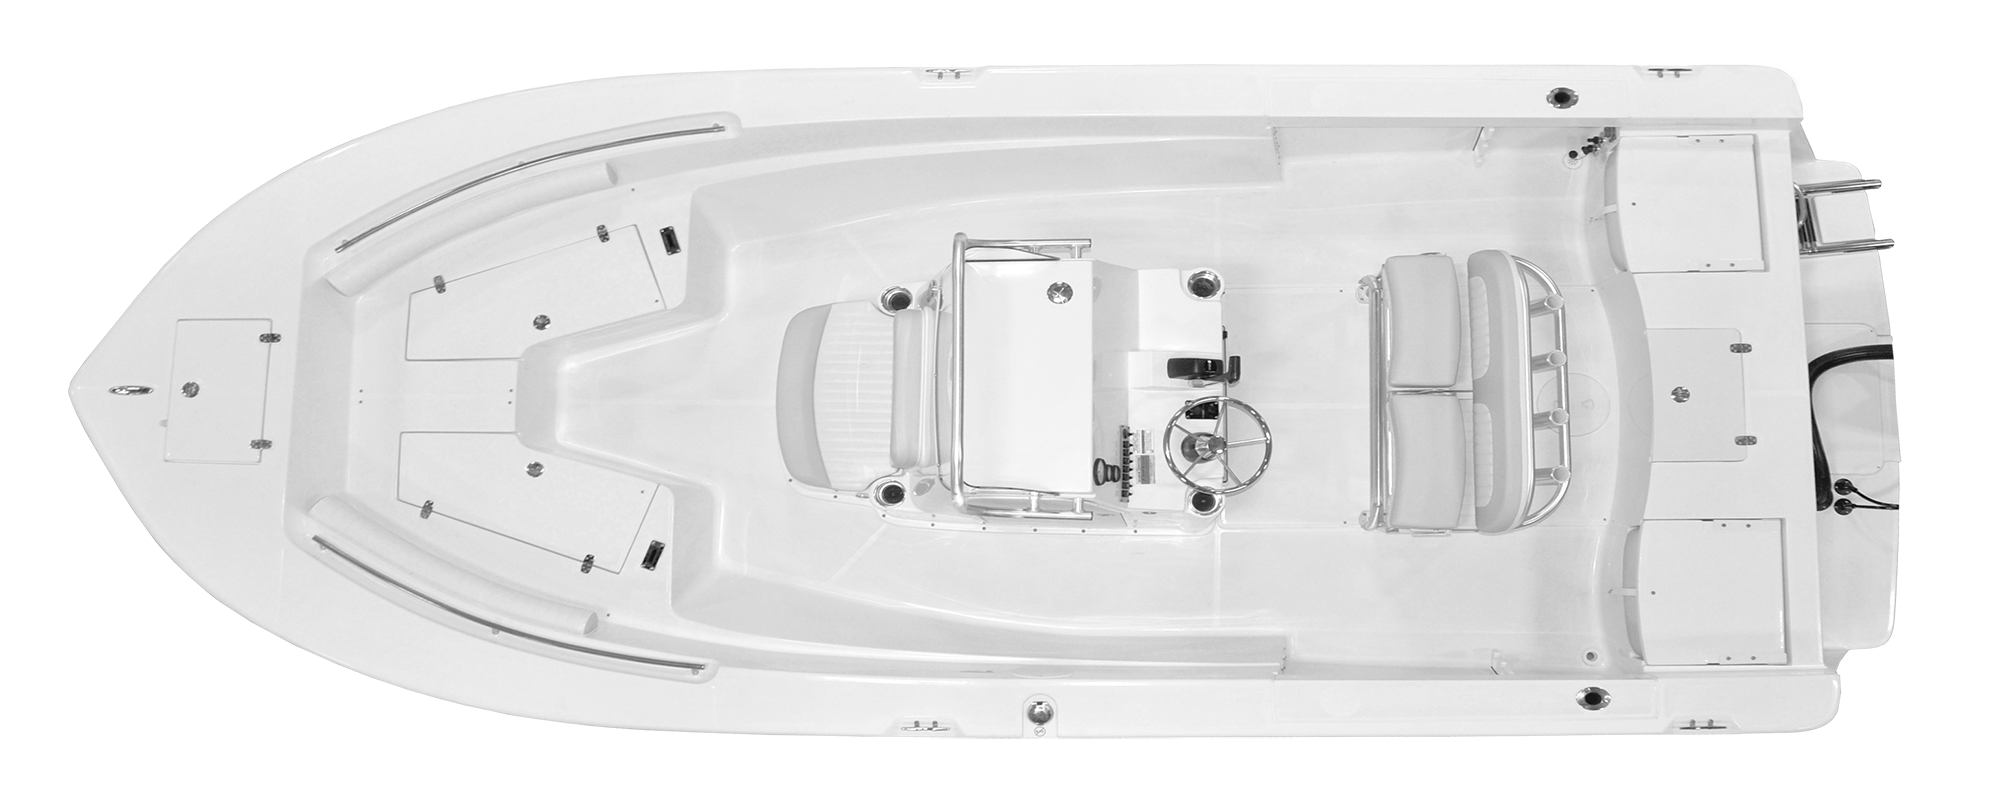 21-Foot Center Console Deck Layout